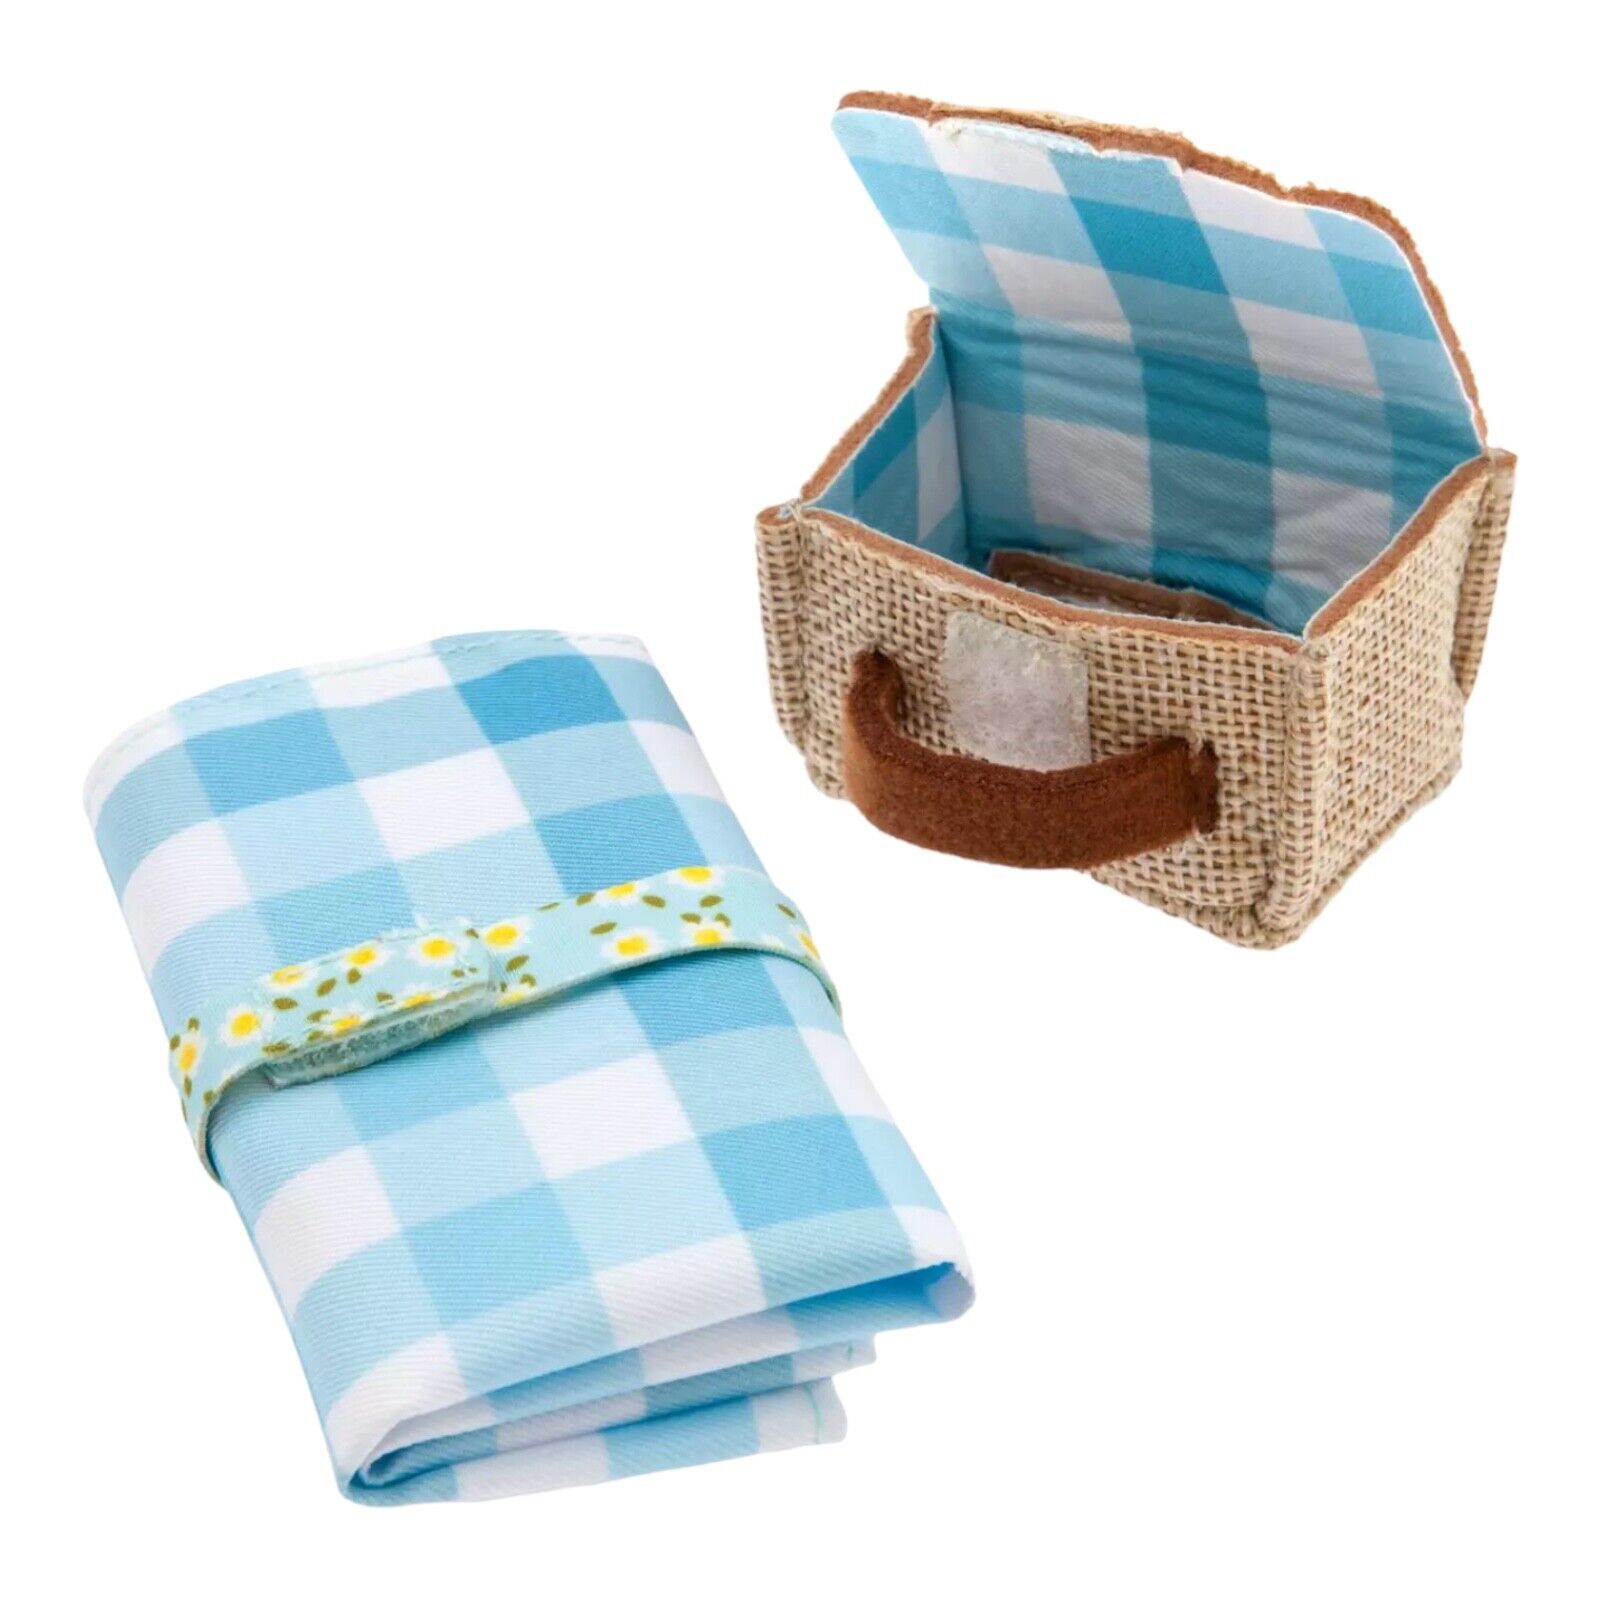 Disney nuiMOs Cottage Core Accessories Picnic Blanket and Basket Set